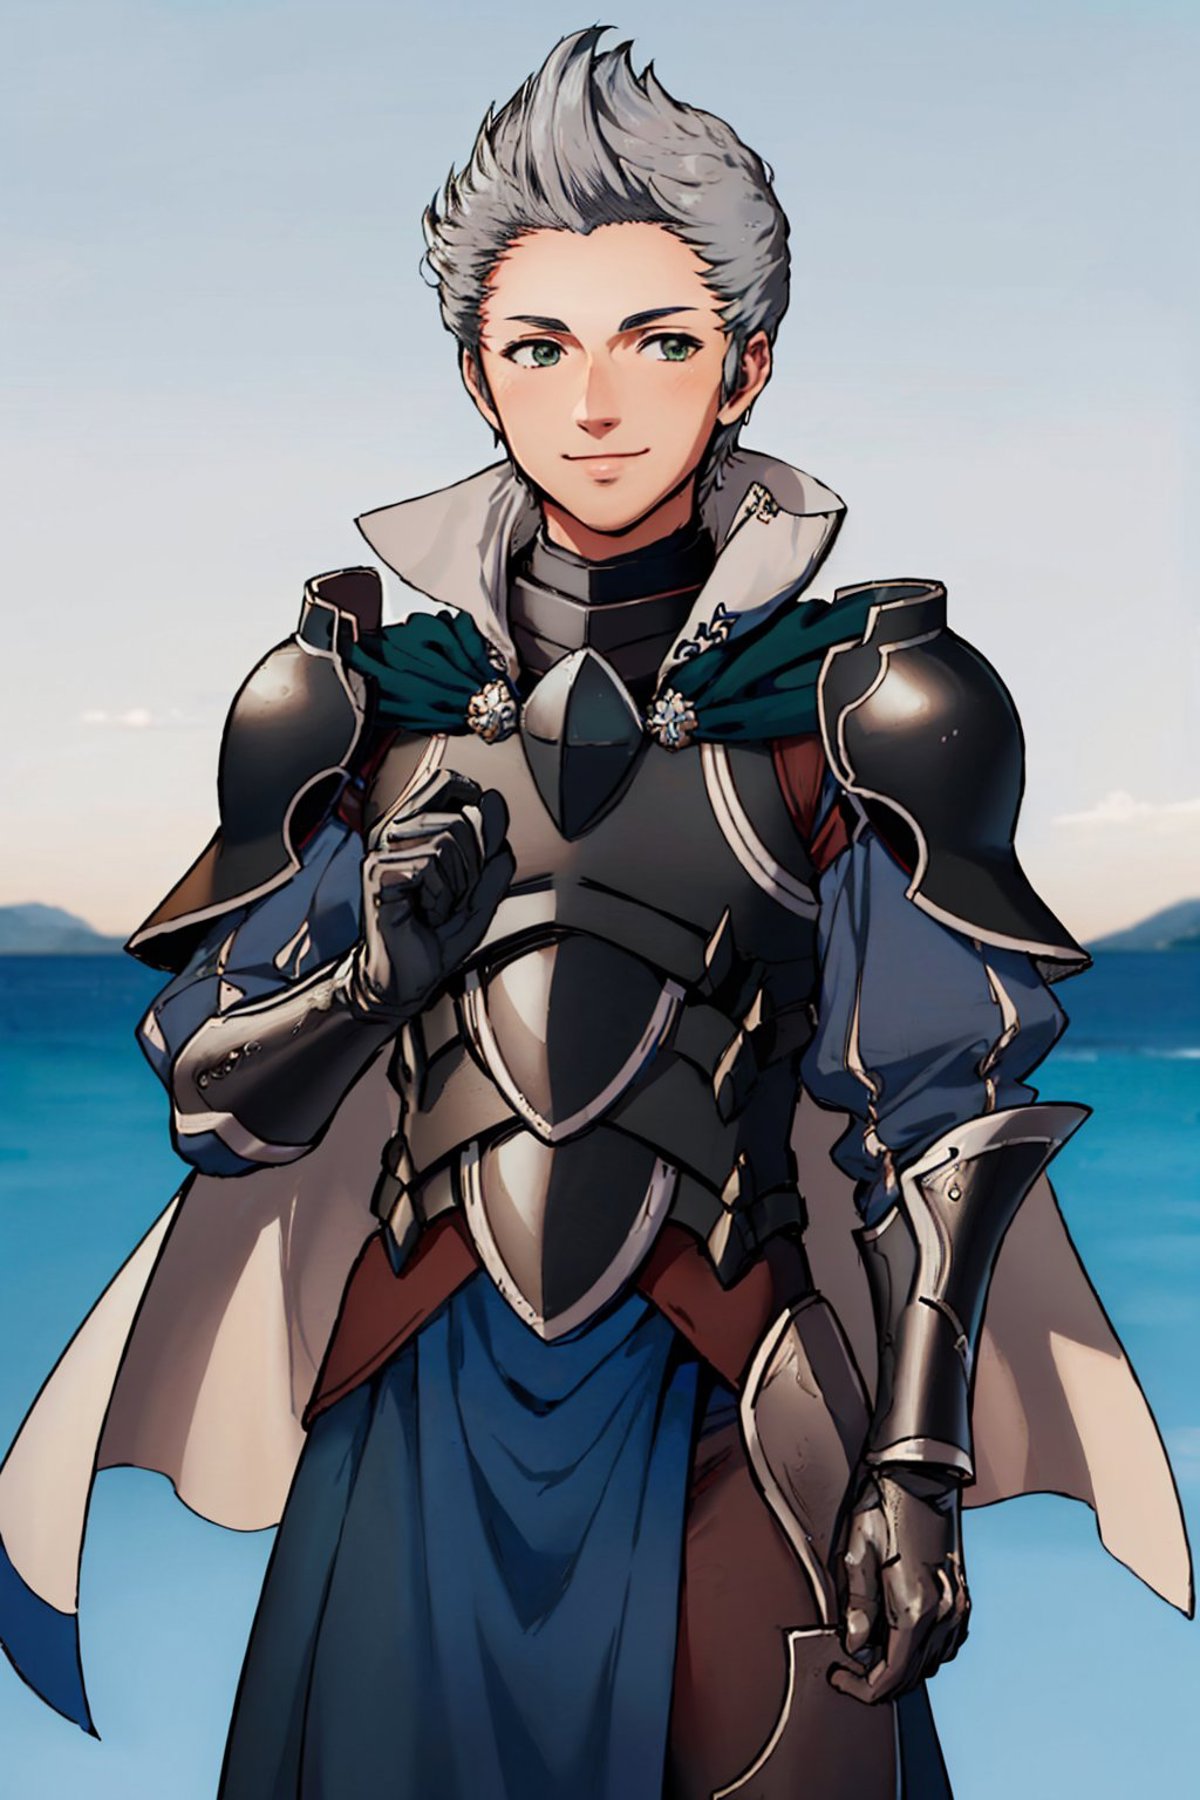 Silas | Fire Emblem Fates image by justTNP